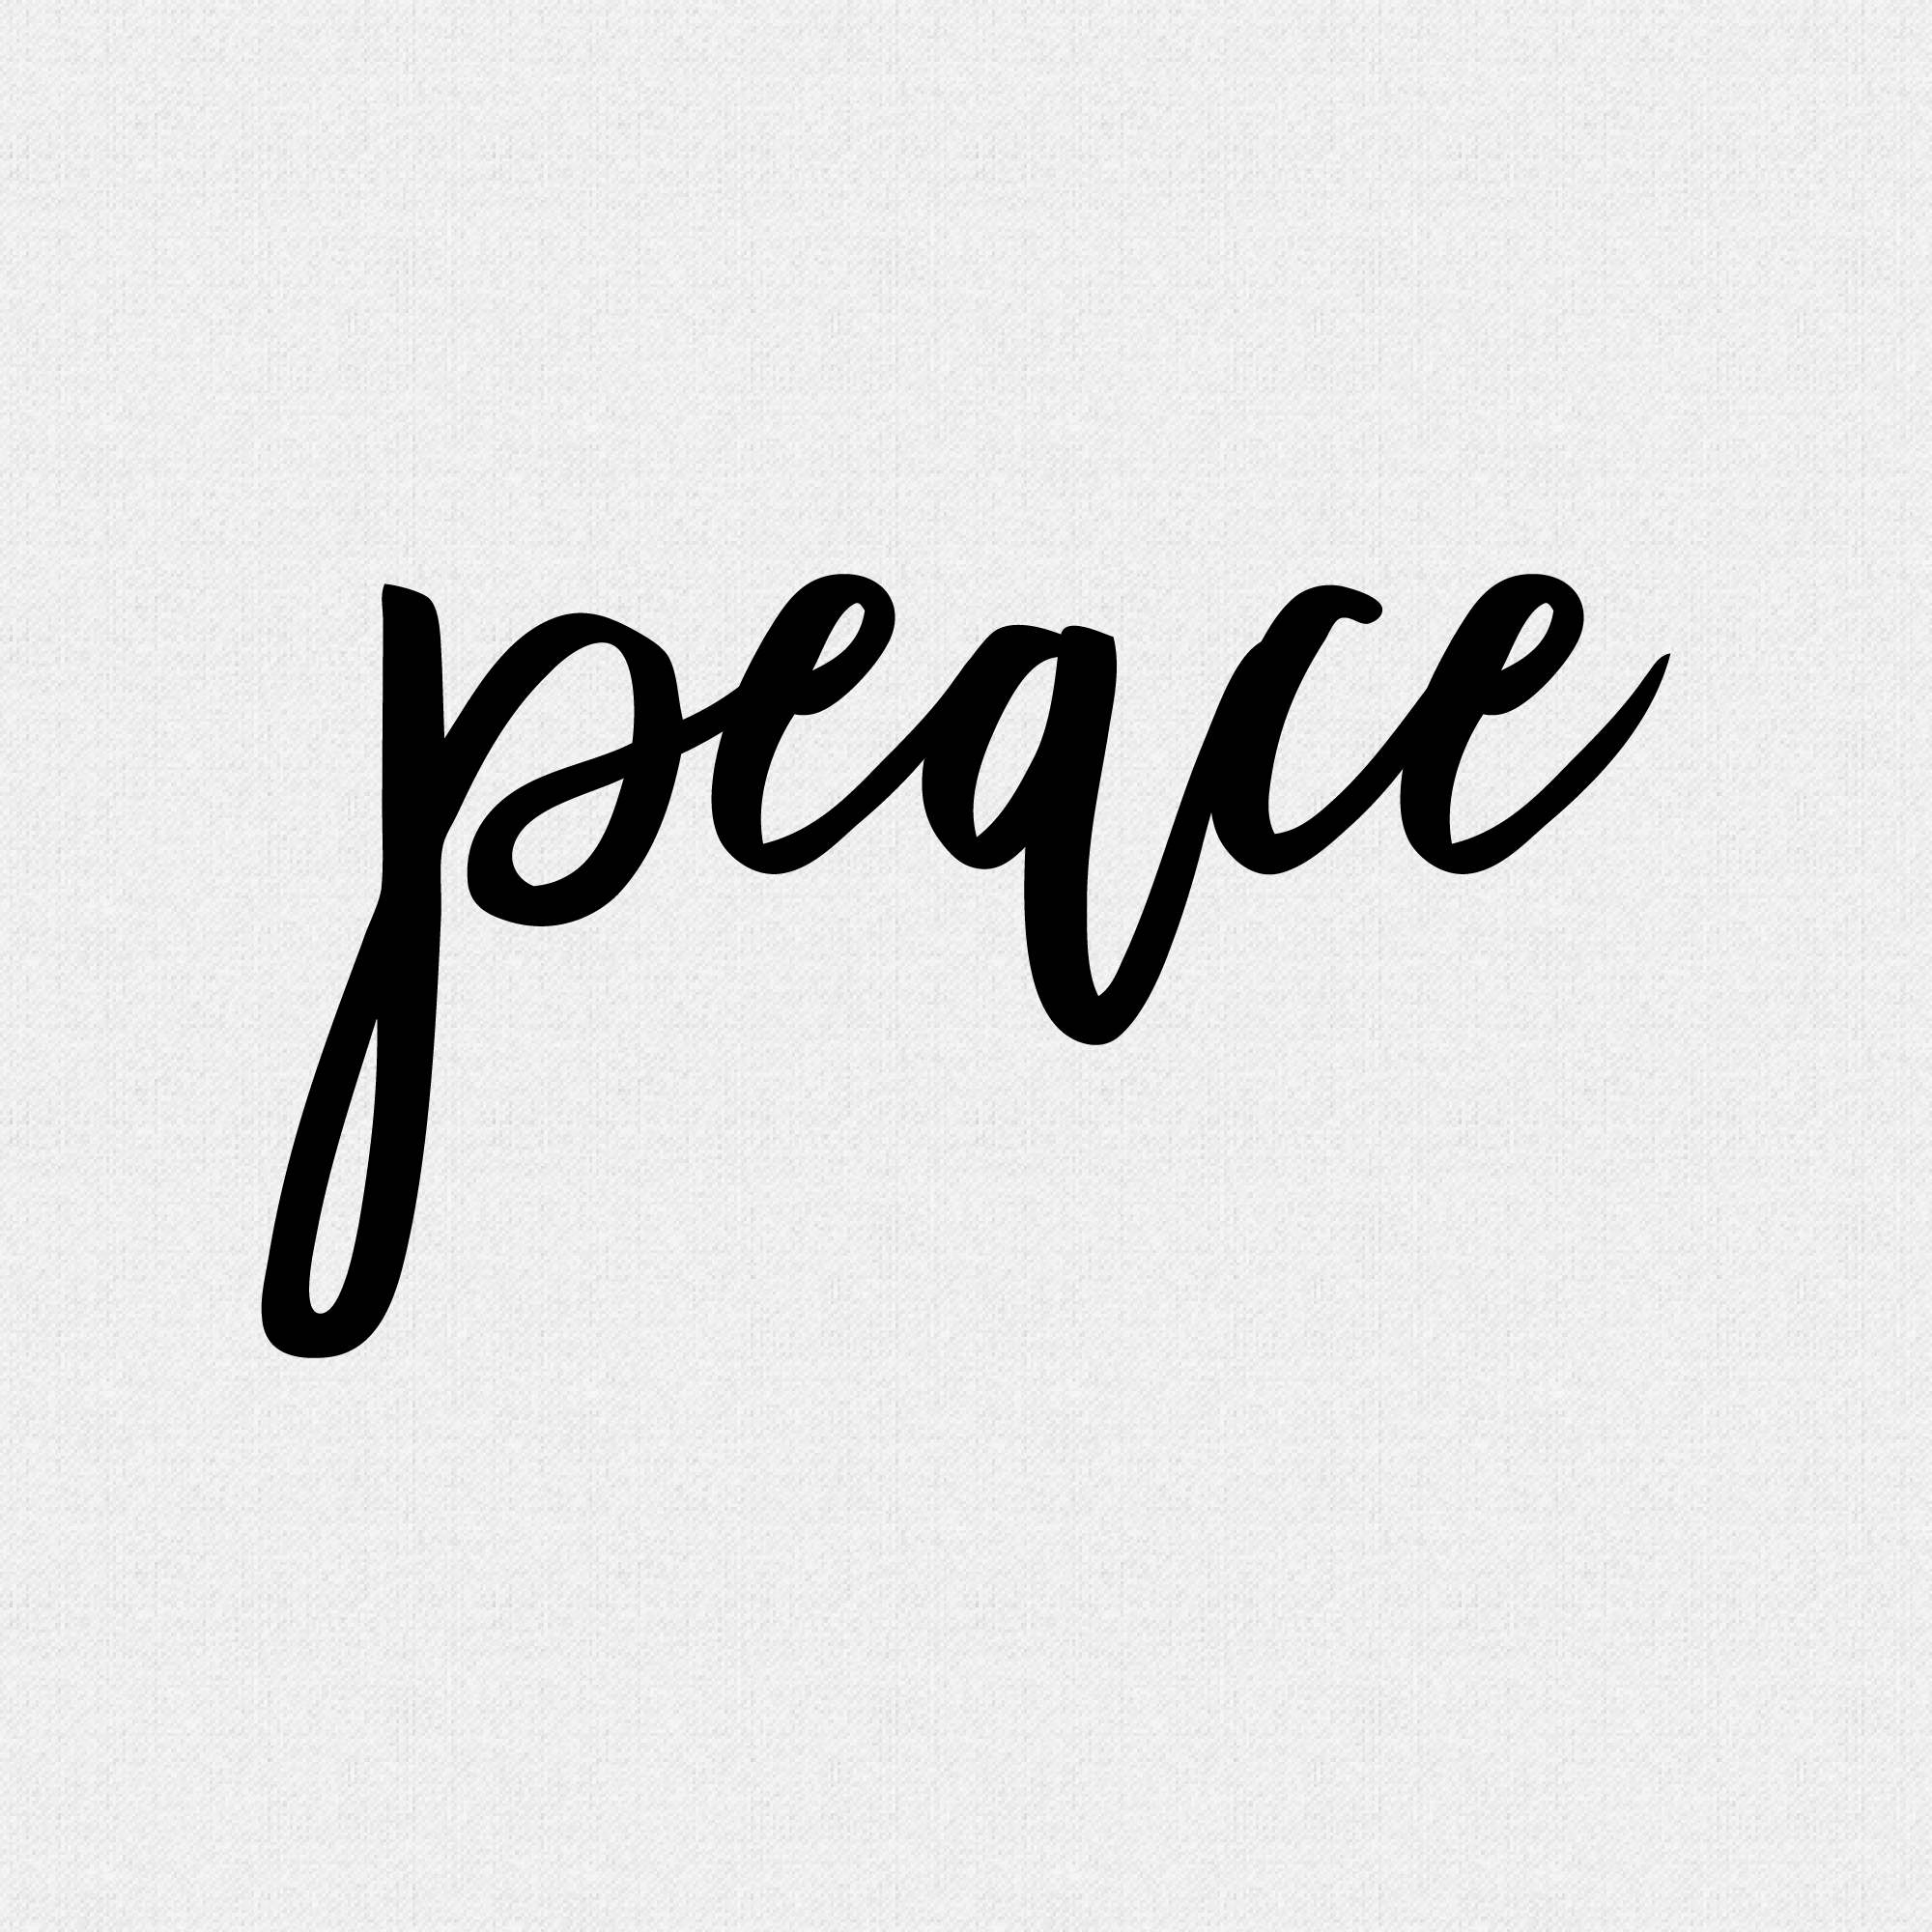 Peace Rubber Stamp for Scrapbooking, Memory Planning, Crafting, Making Wrapping Paper